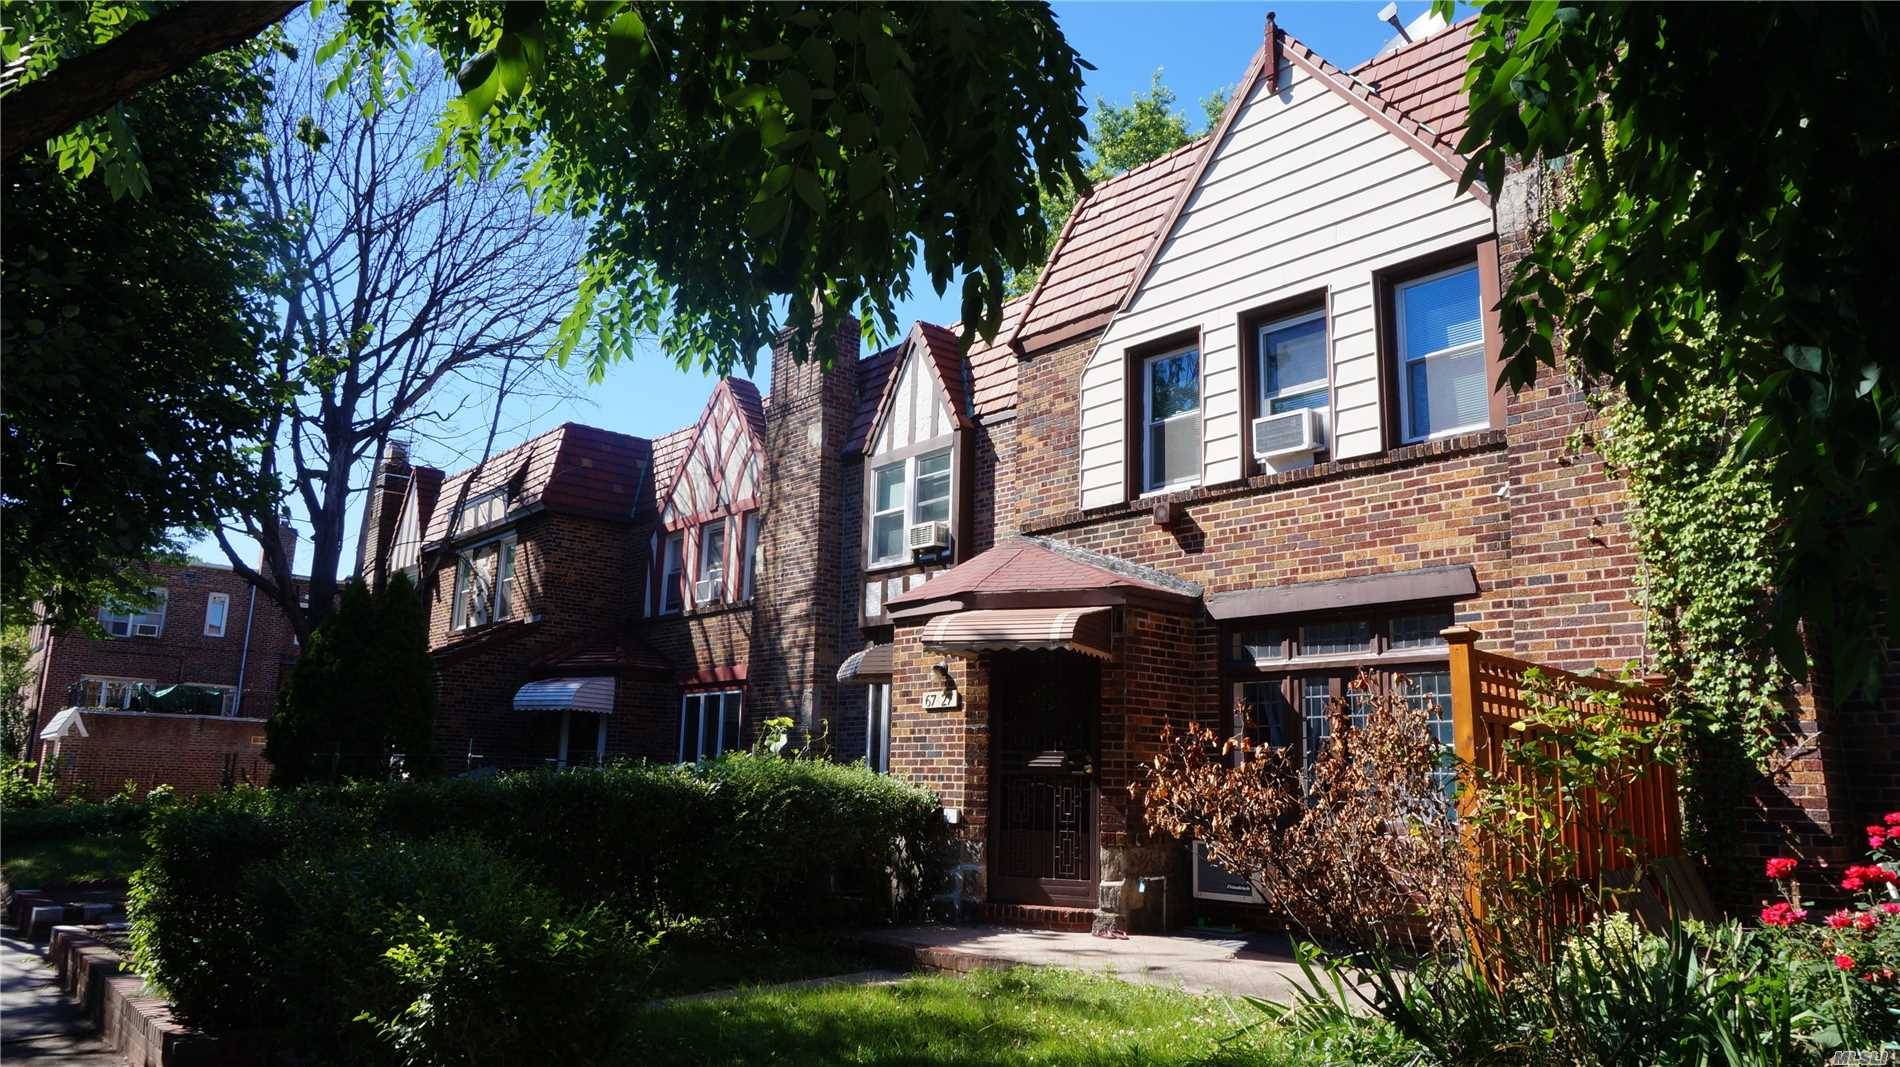 Tudor Style Town House Located On A Quiet, Beautifully Maintained Street.